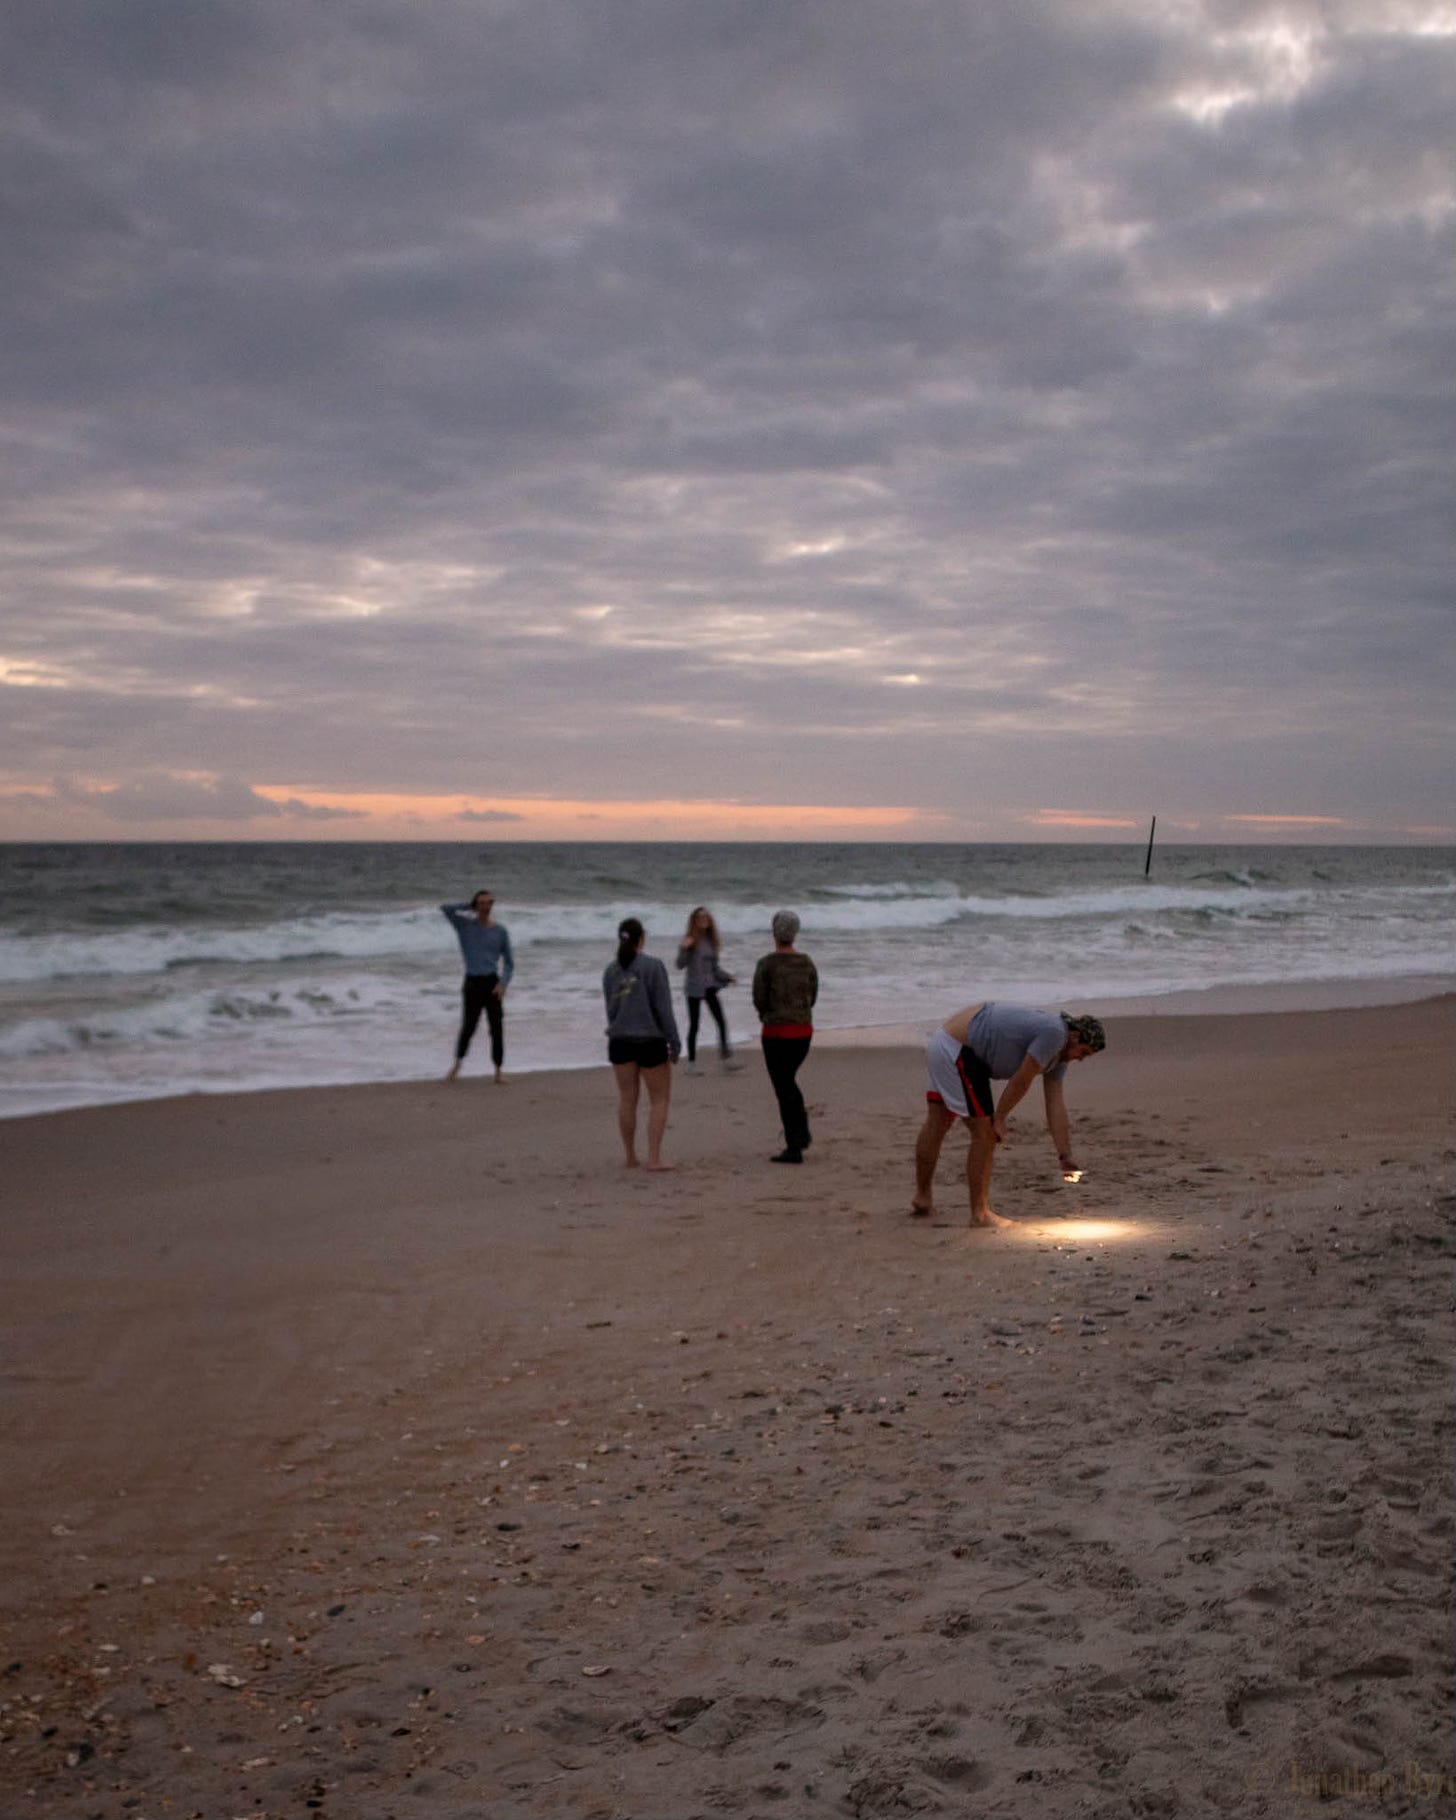 Group of people on a beach. Someone searches the sand with a flashlight